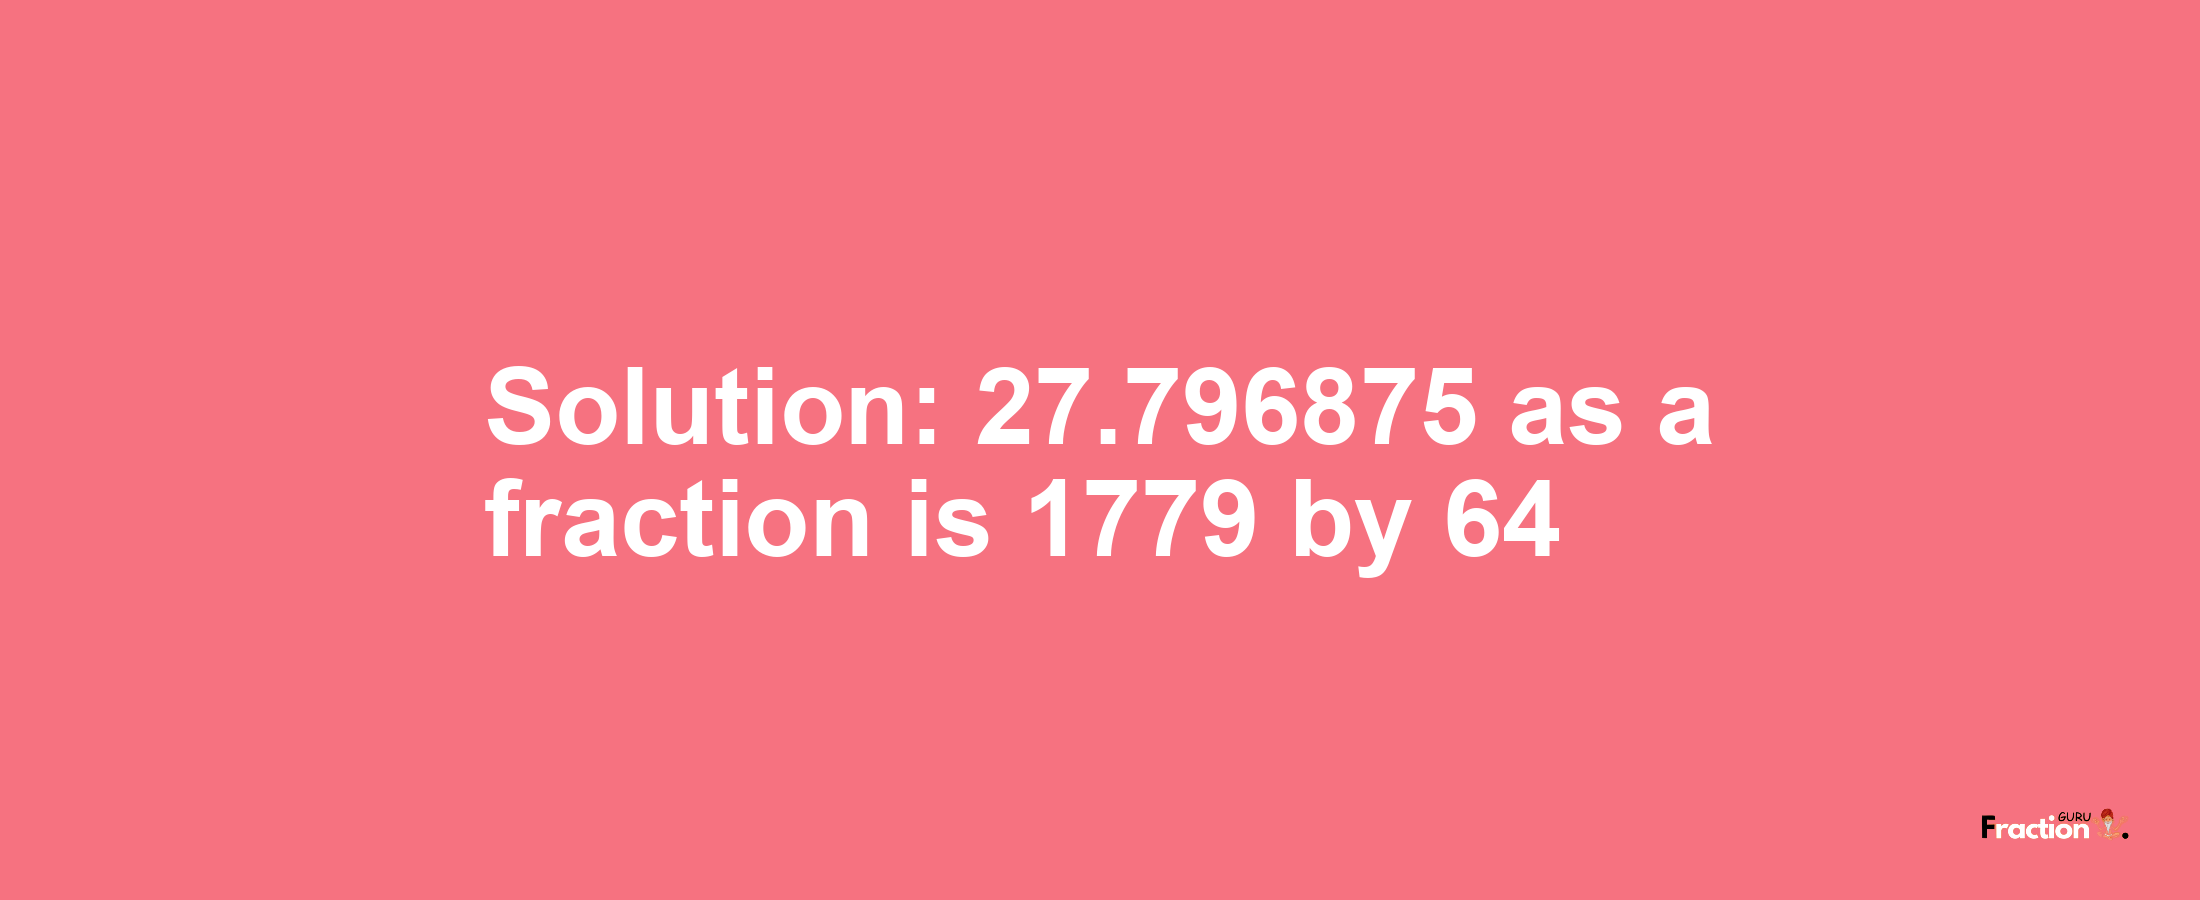 Solution:27.796875 as a fraction is 1779/64